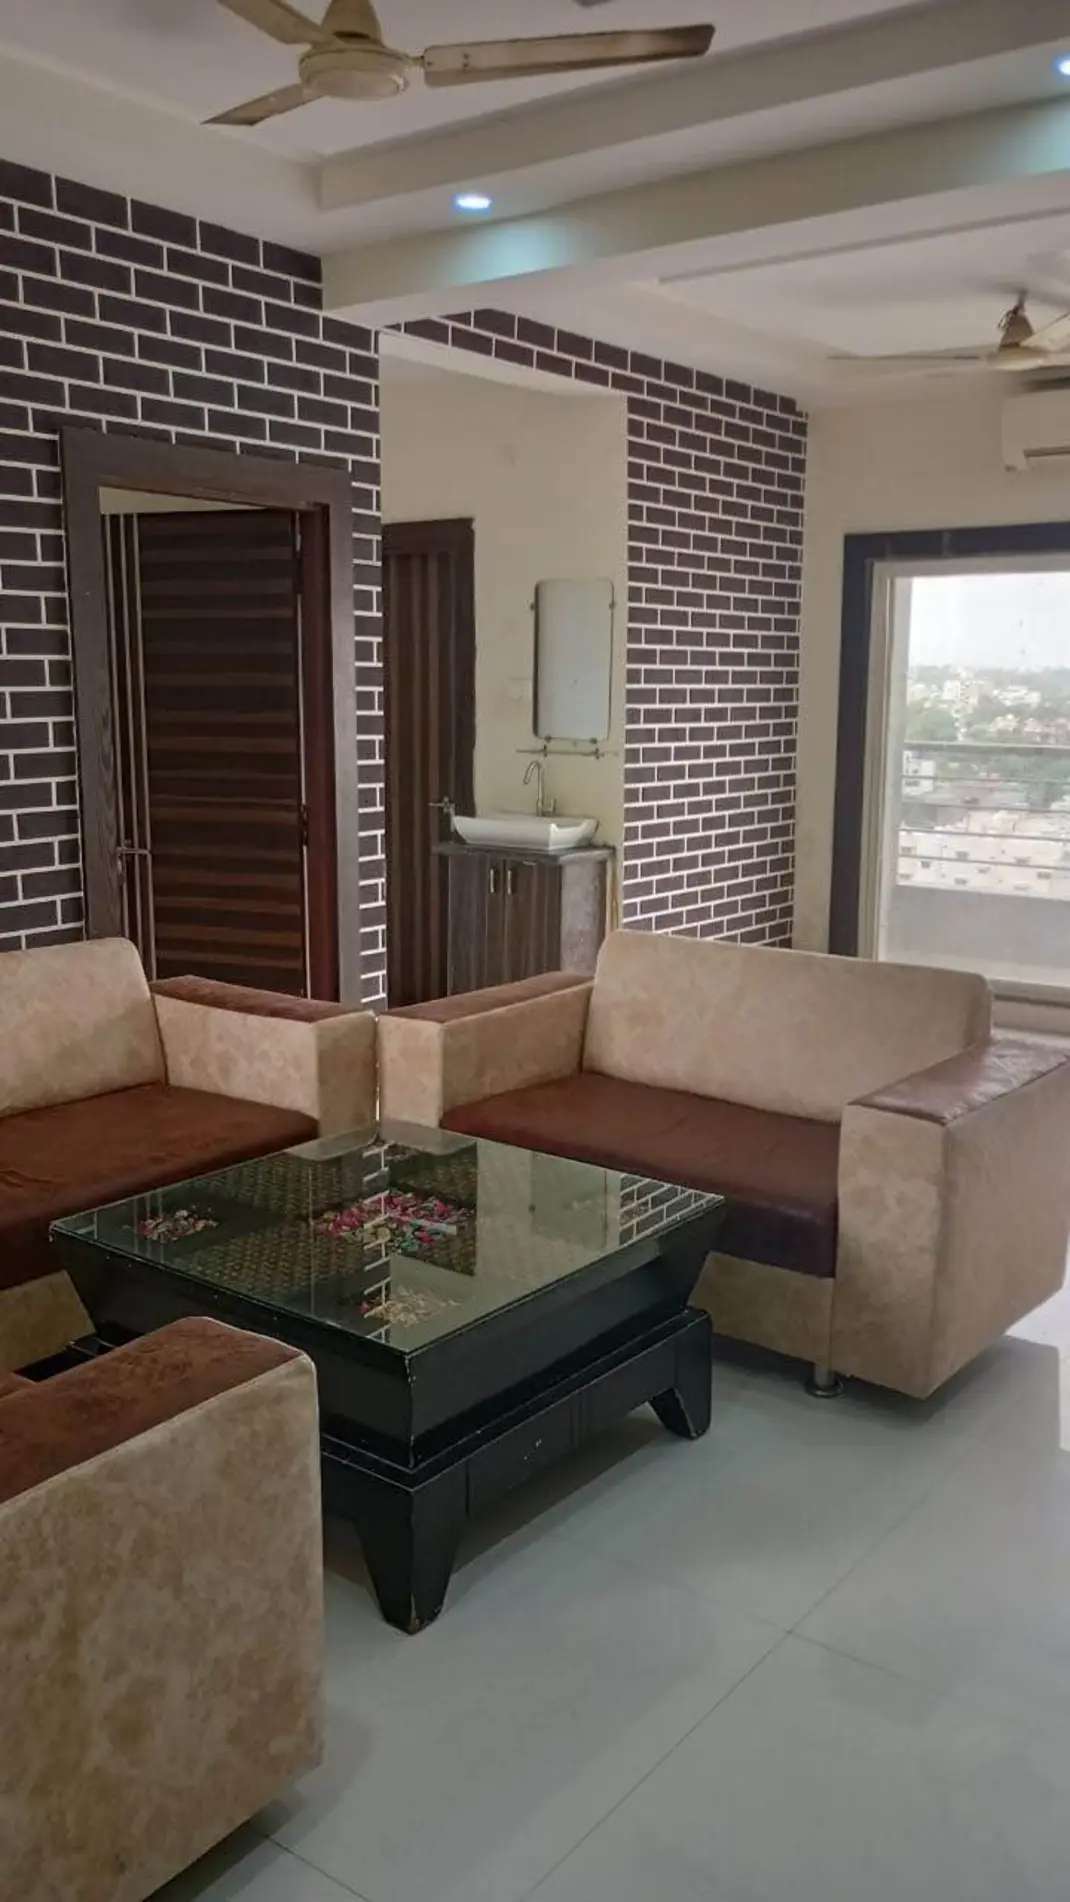 3 Bed/ 2 Bath Rent Apartment/ Flat, Furnished for rent @Rohit nagar bhopal